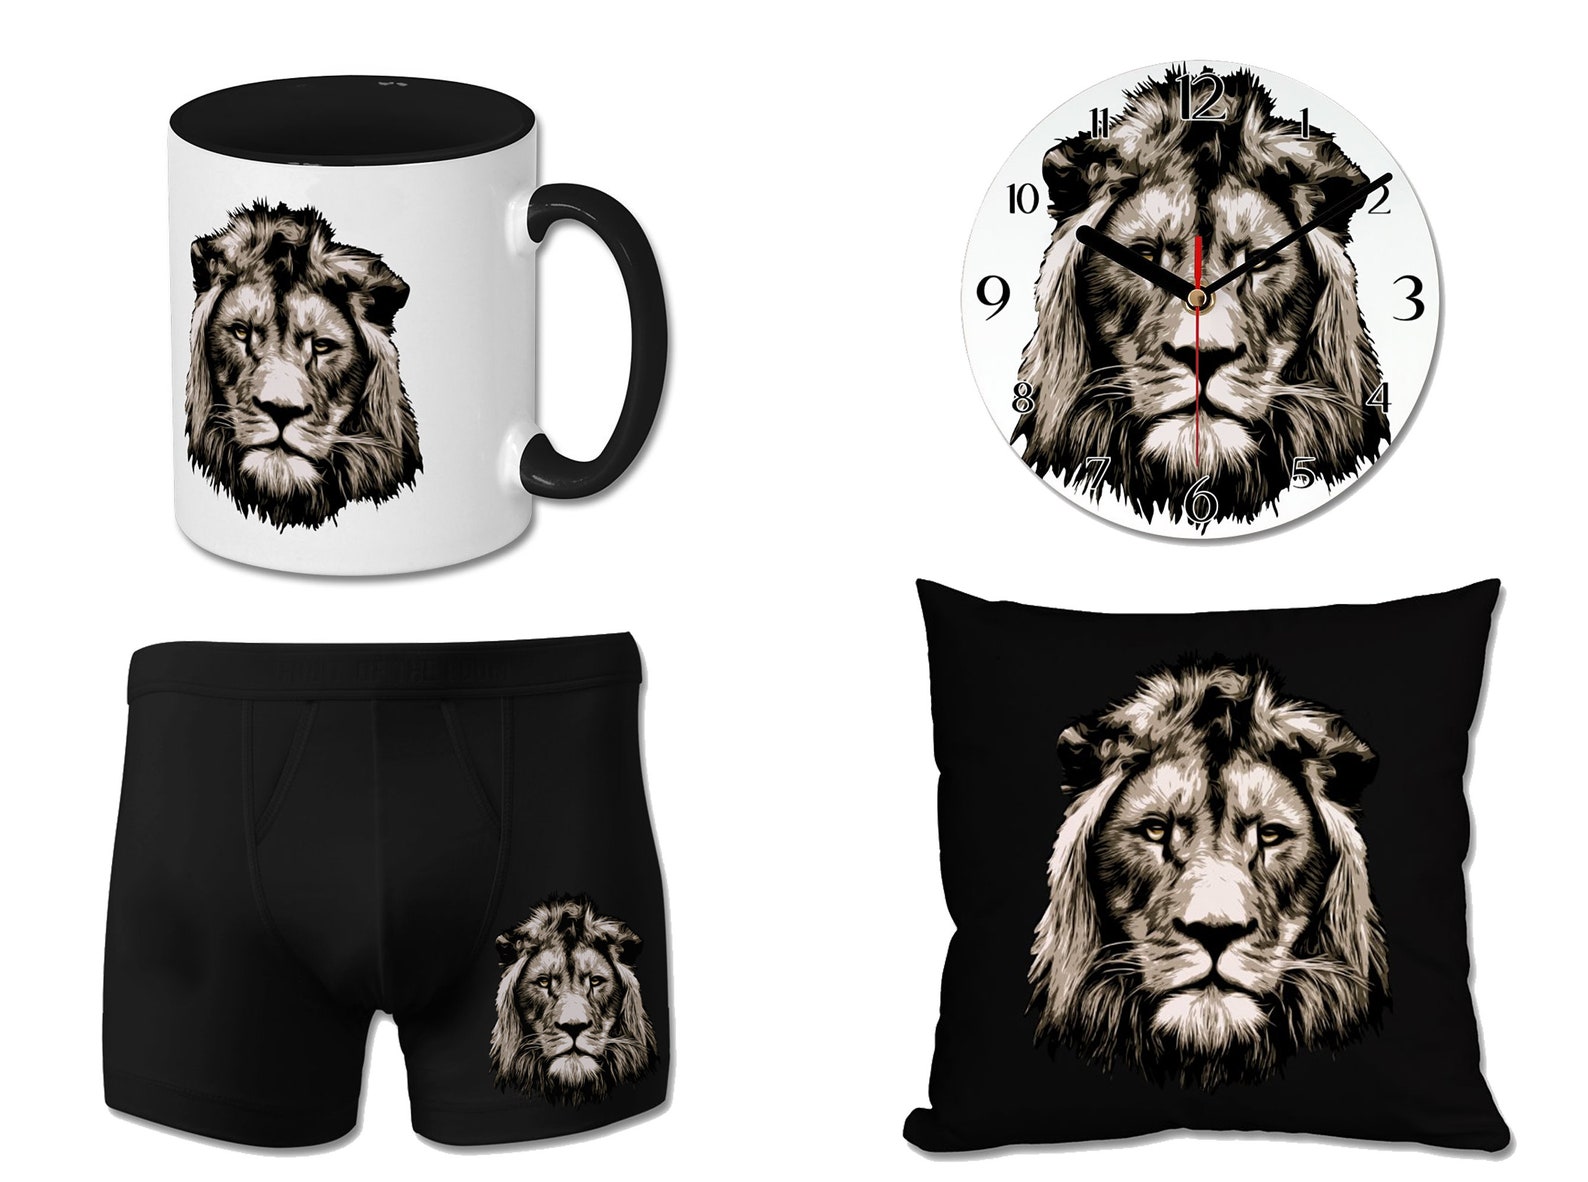 Dark collection with lions.